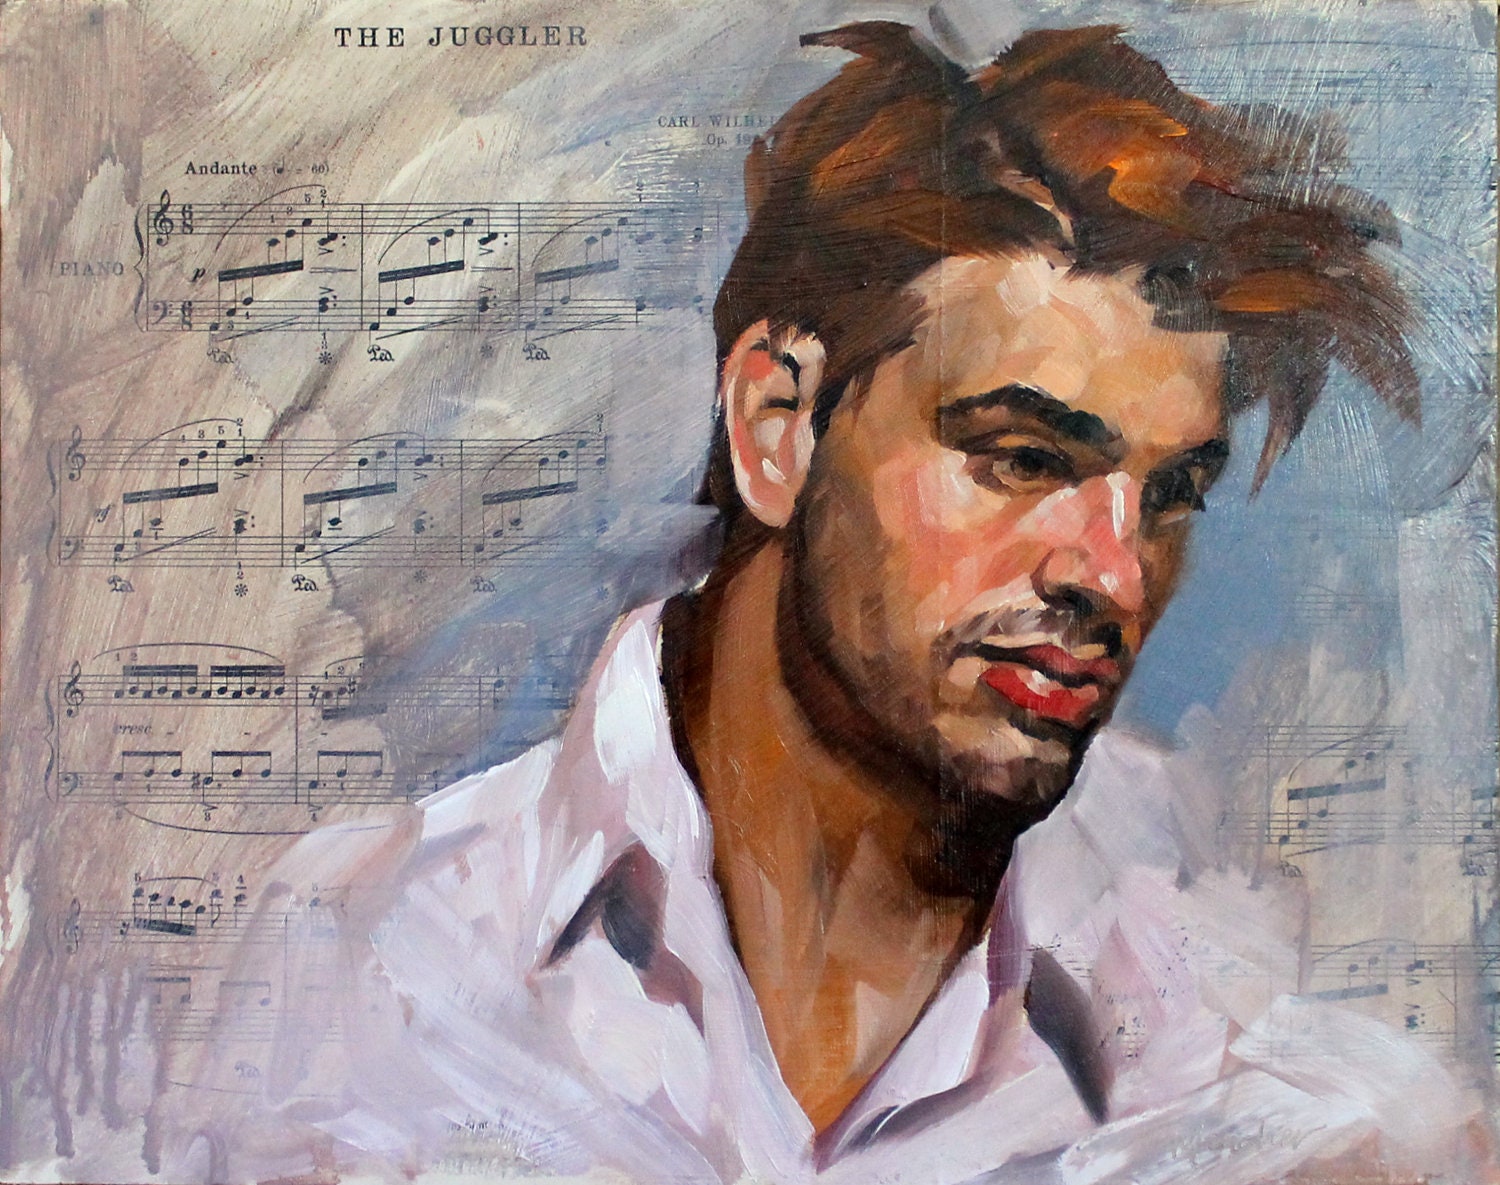 Barry de Treasure 11"x14" oilpaint and sheet music on masonite panel by Kenney Mencher